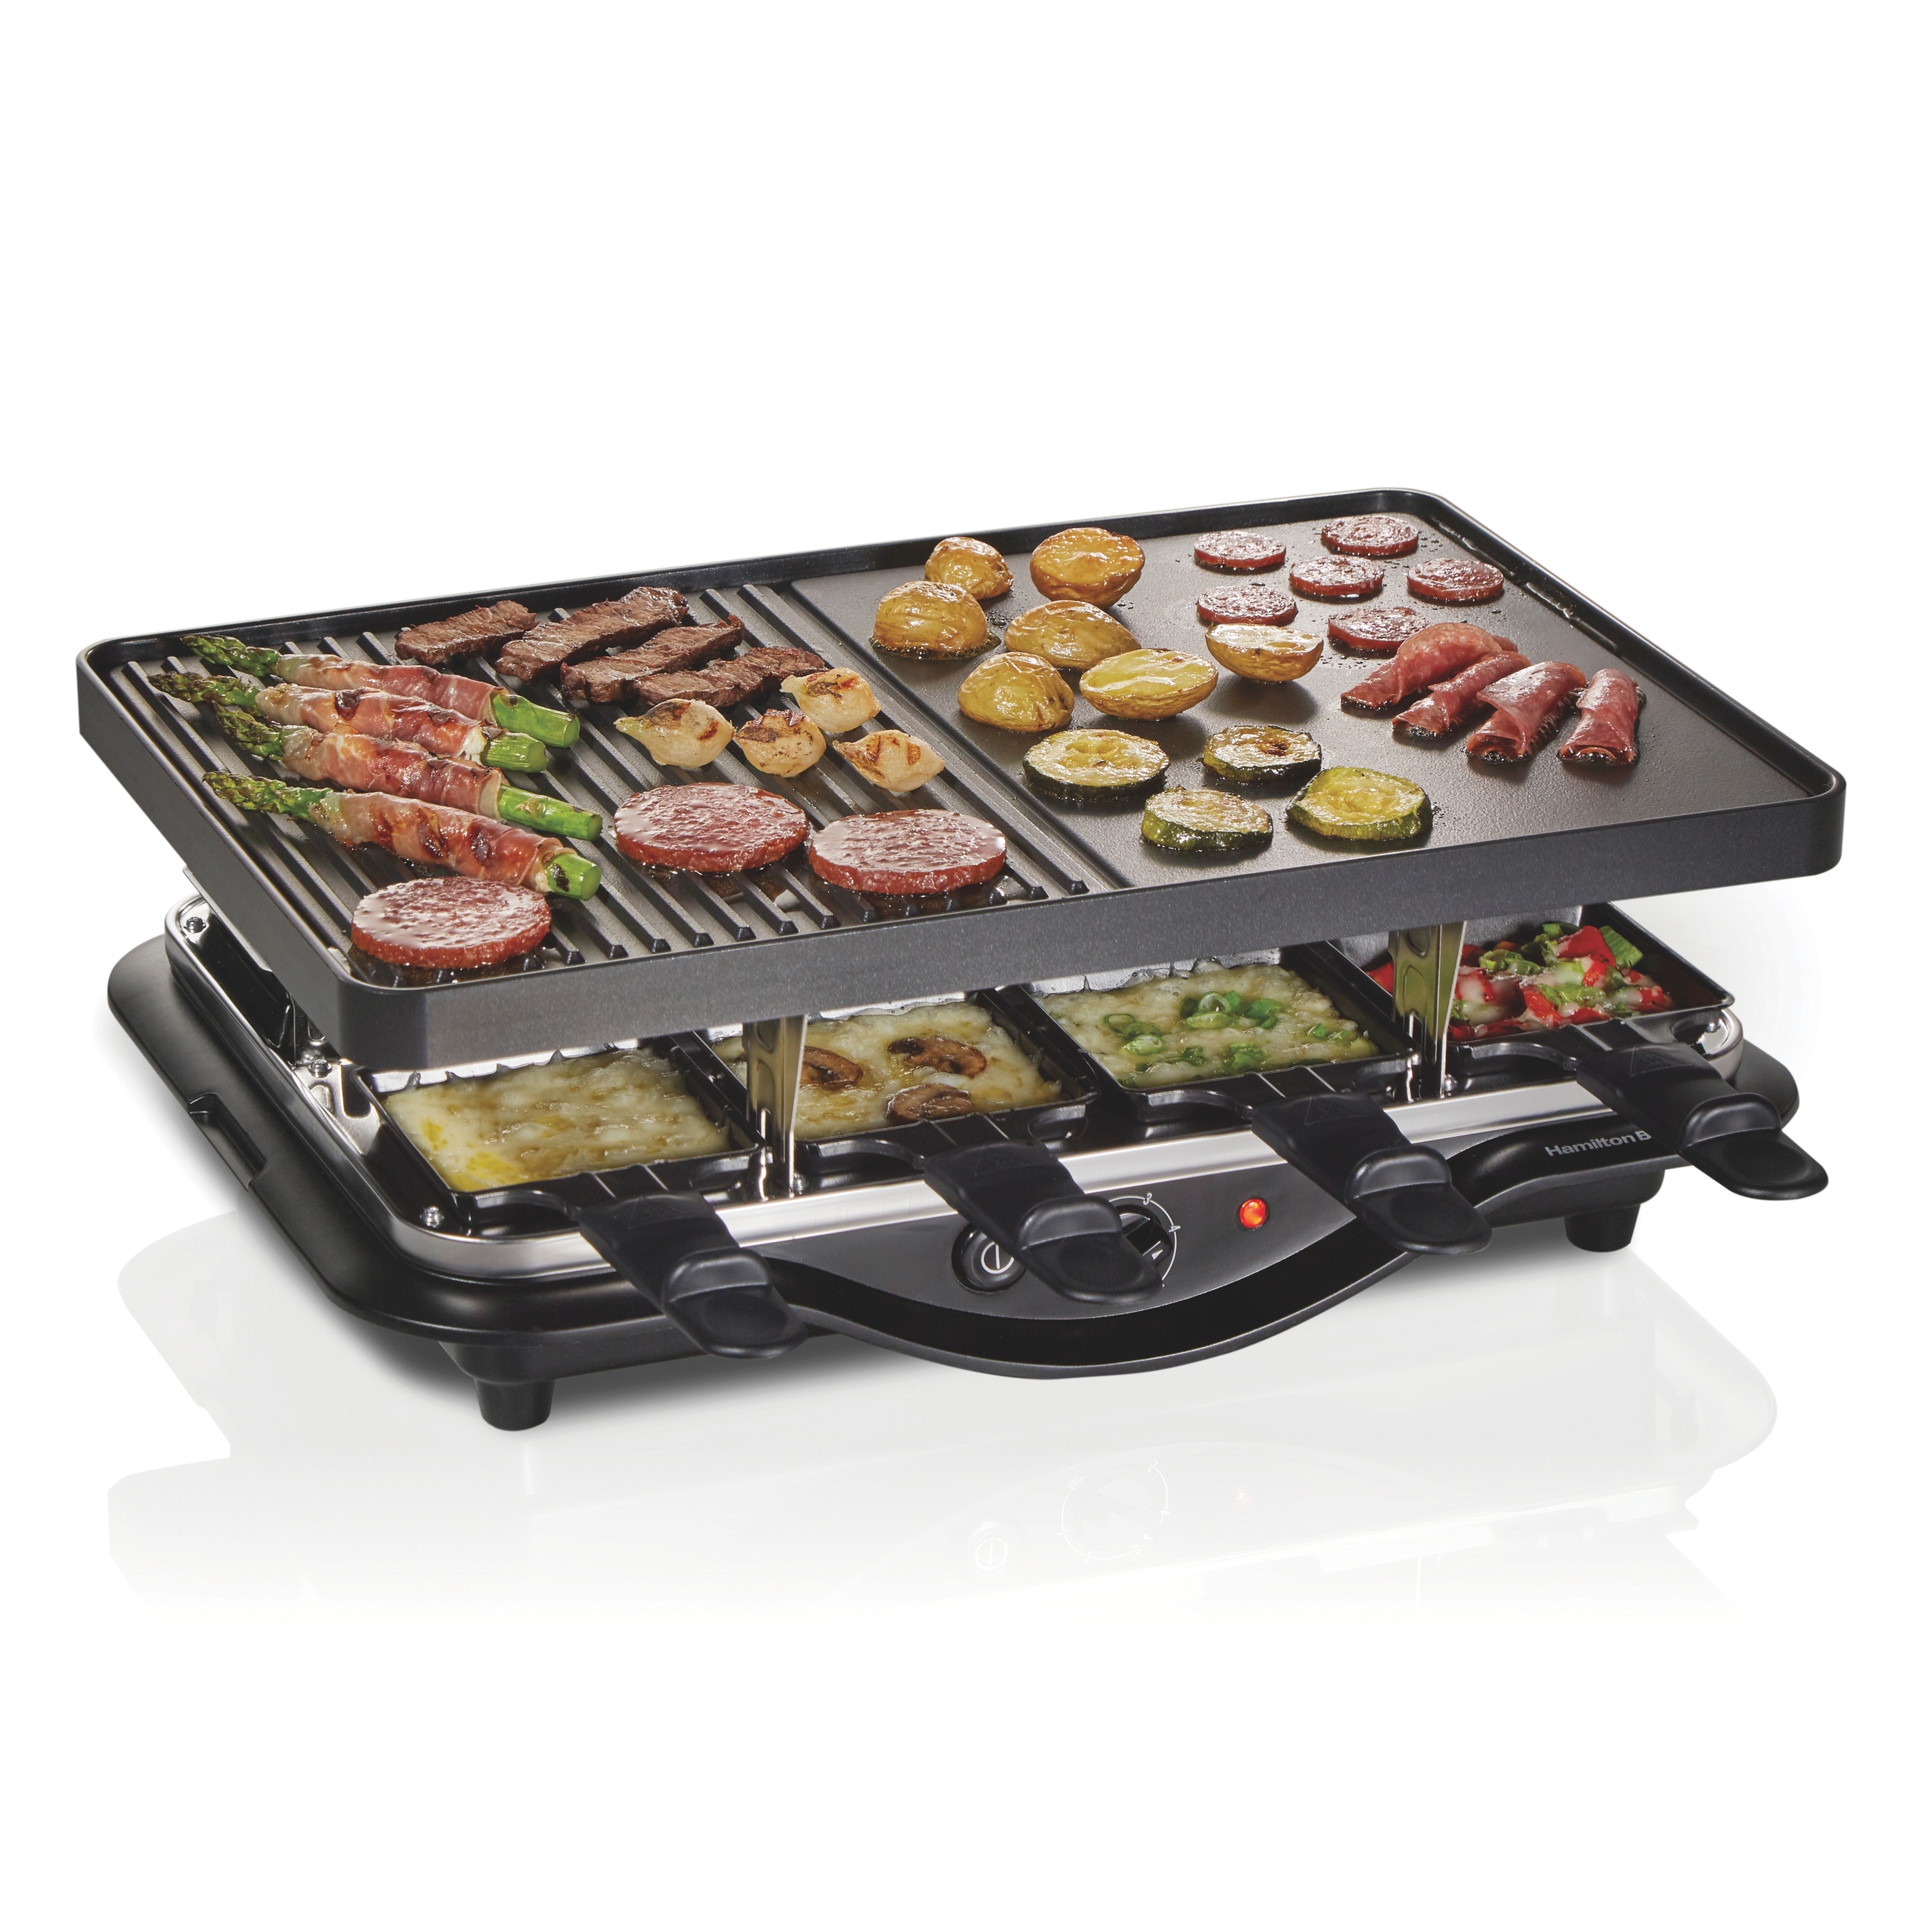 https://ak1.ostkcdn.com/images/products/is/images/direct/0894283c9aa8894545bacfde610844d3fa69879a/Raclette-Portable-Party-Grill.jpg